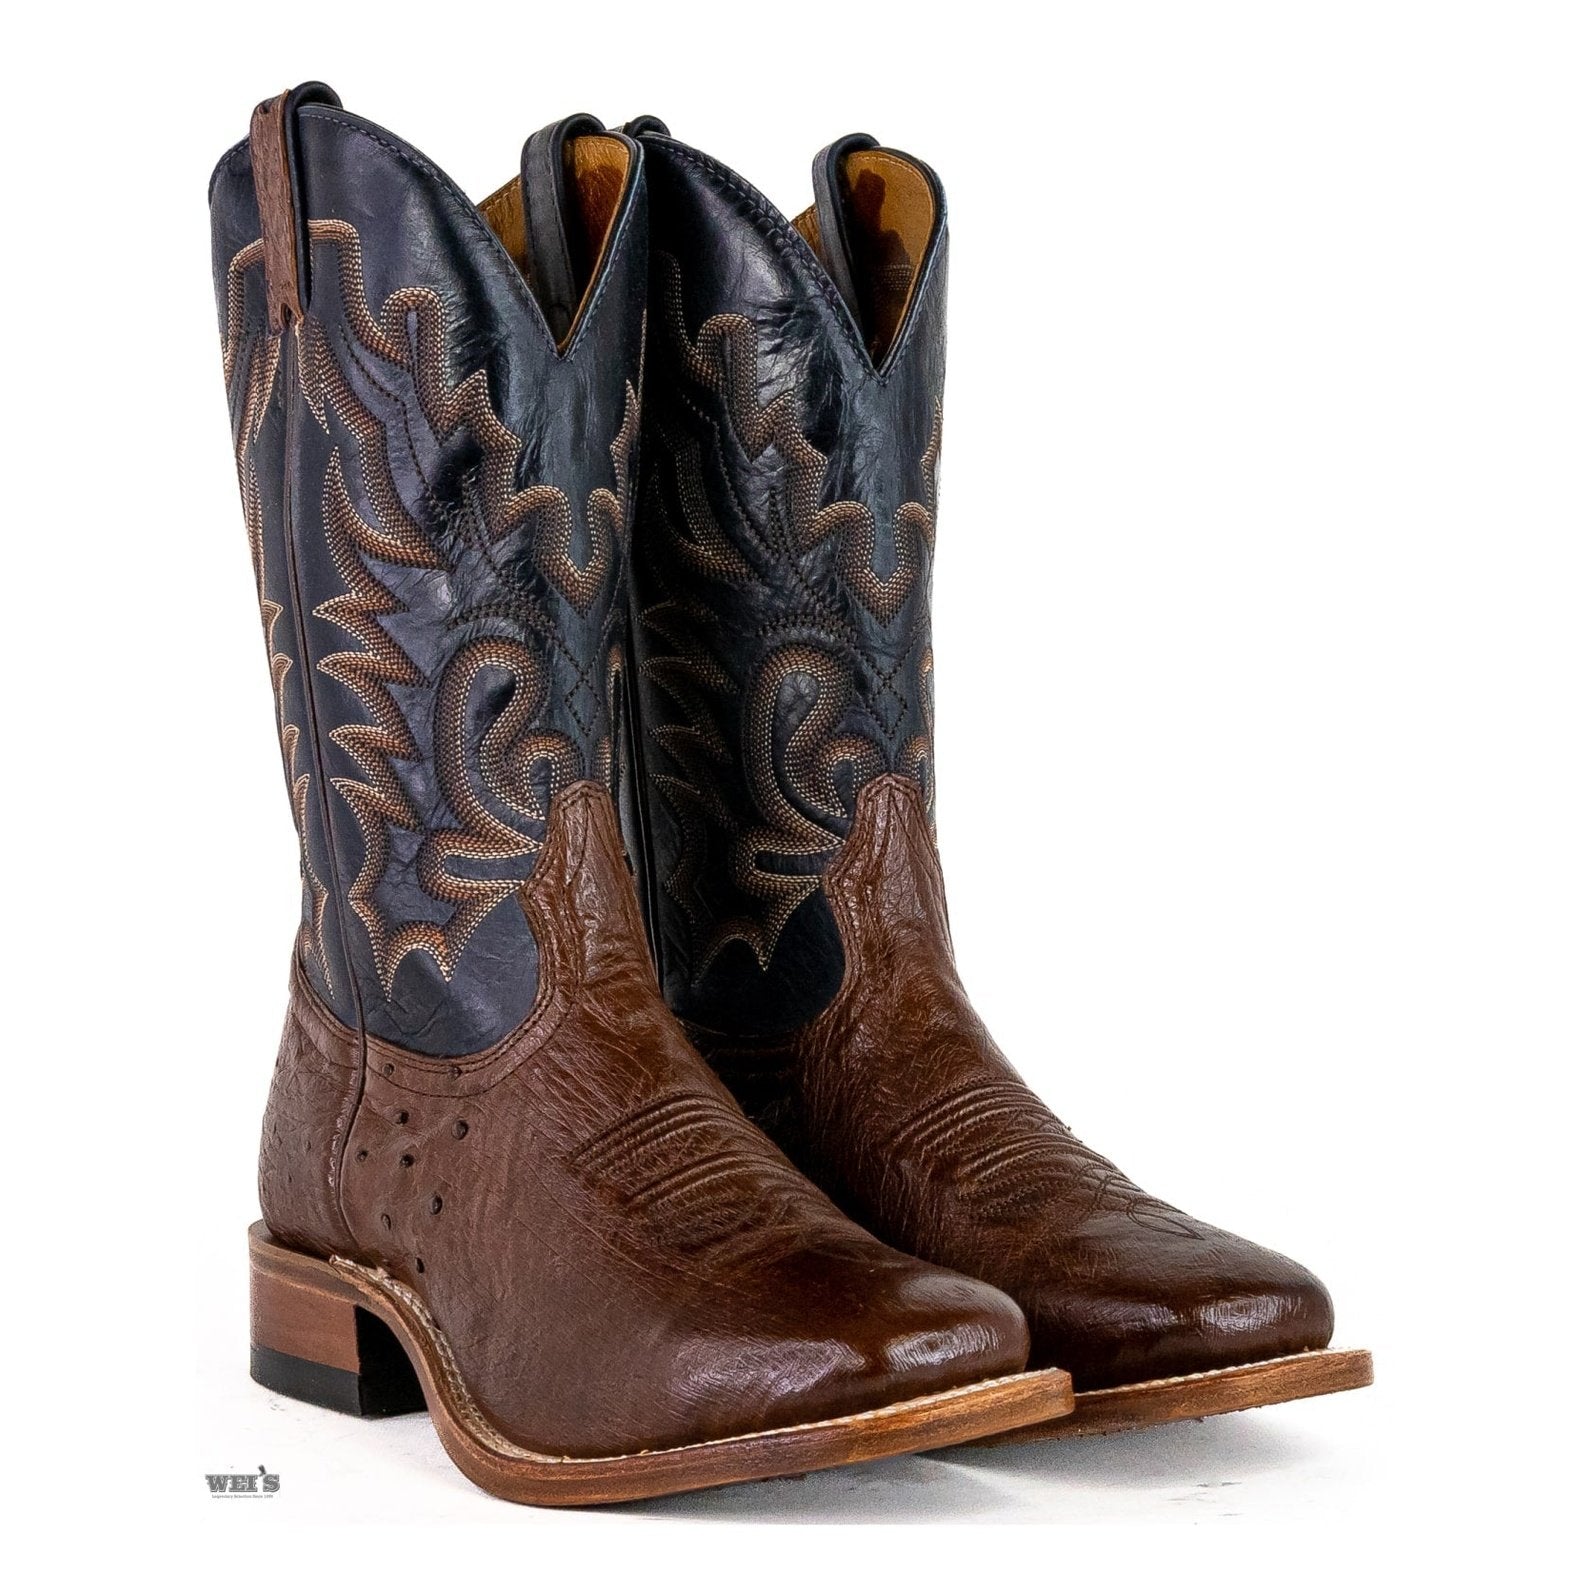 Boulet Men's Cowboy Boots 13" Exotic Ostrich Belly Roper Heel Wide Square Toe 7509